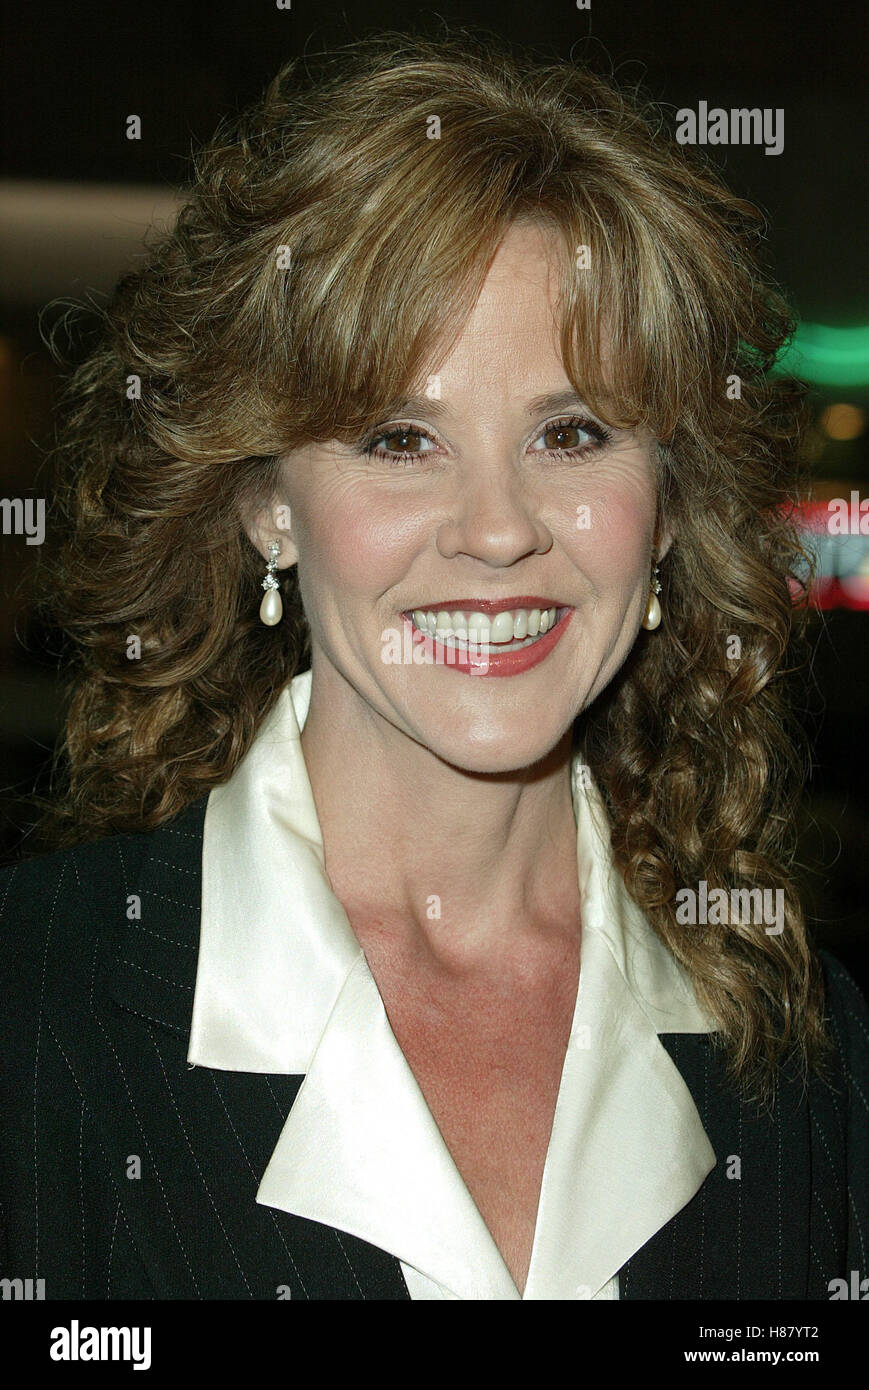 Show me pictures of linda blair